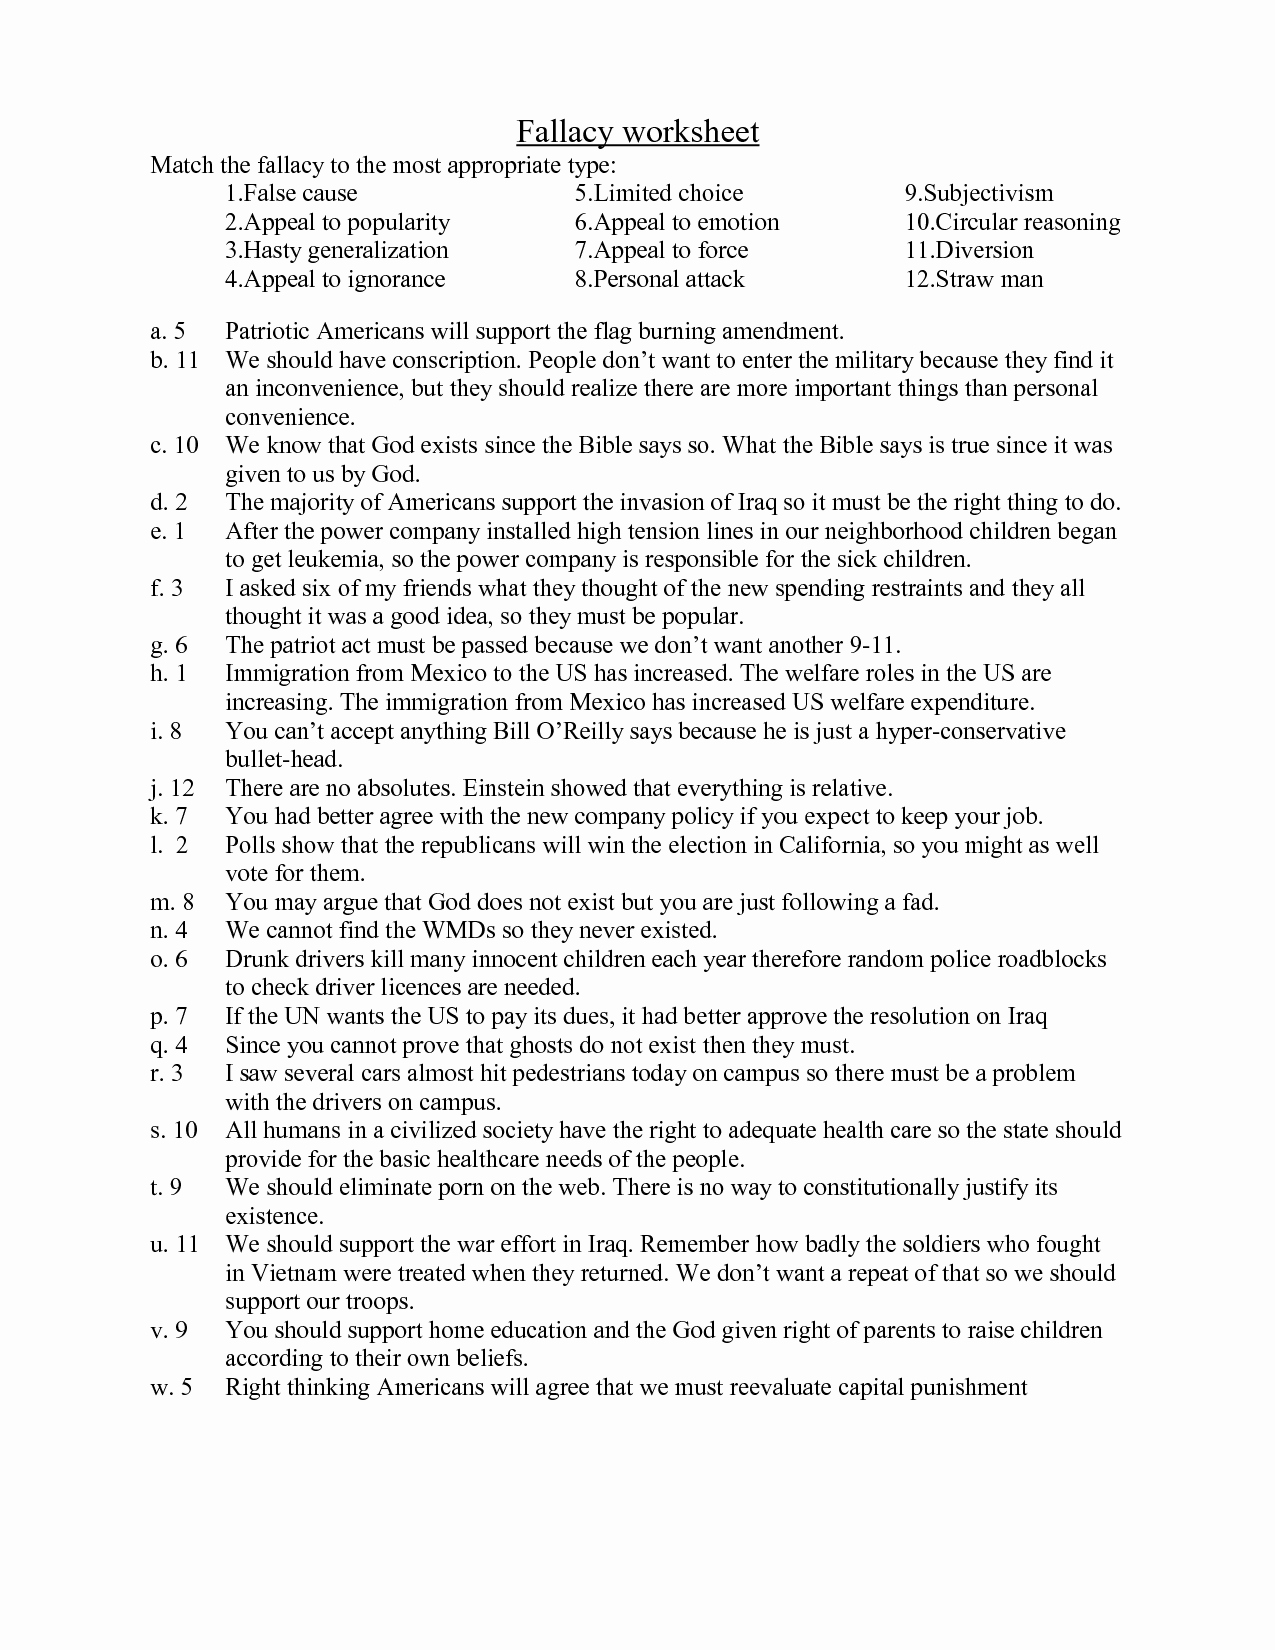 Logical Fallacies Worksheet with Answers Unique 14 Best Of Amendment Matching Worksheet 27